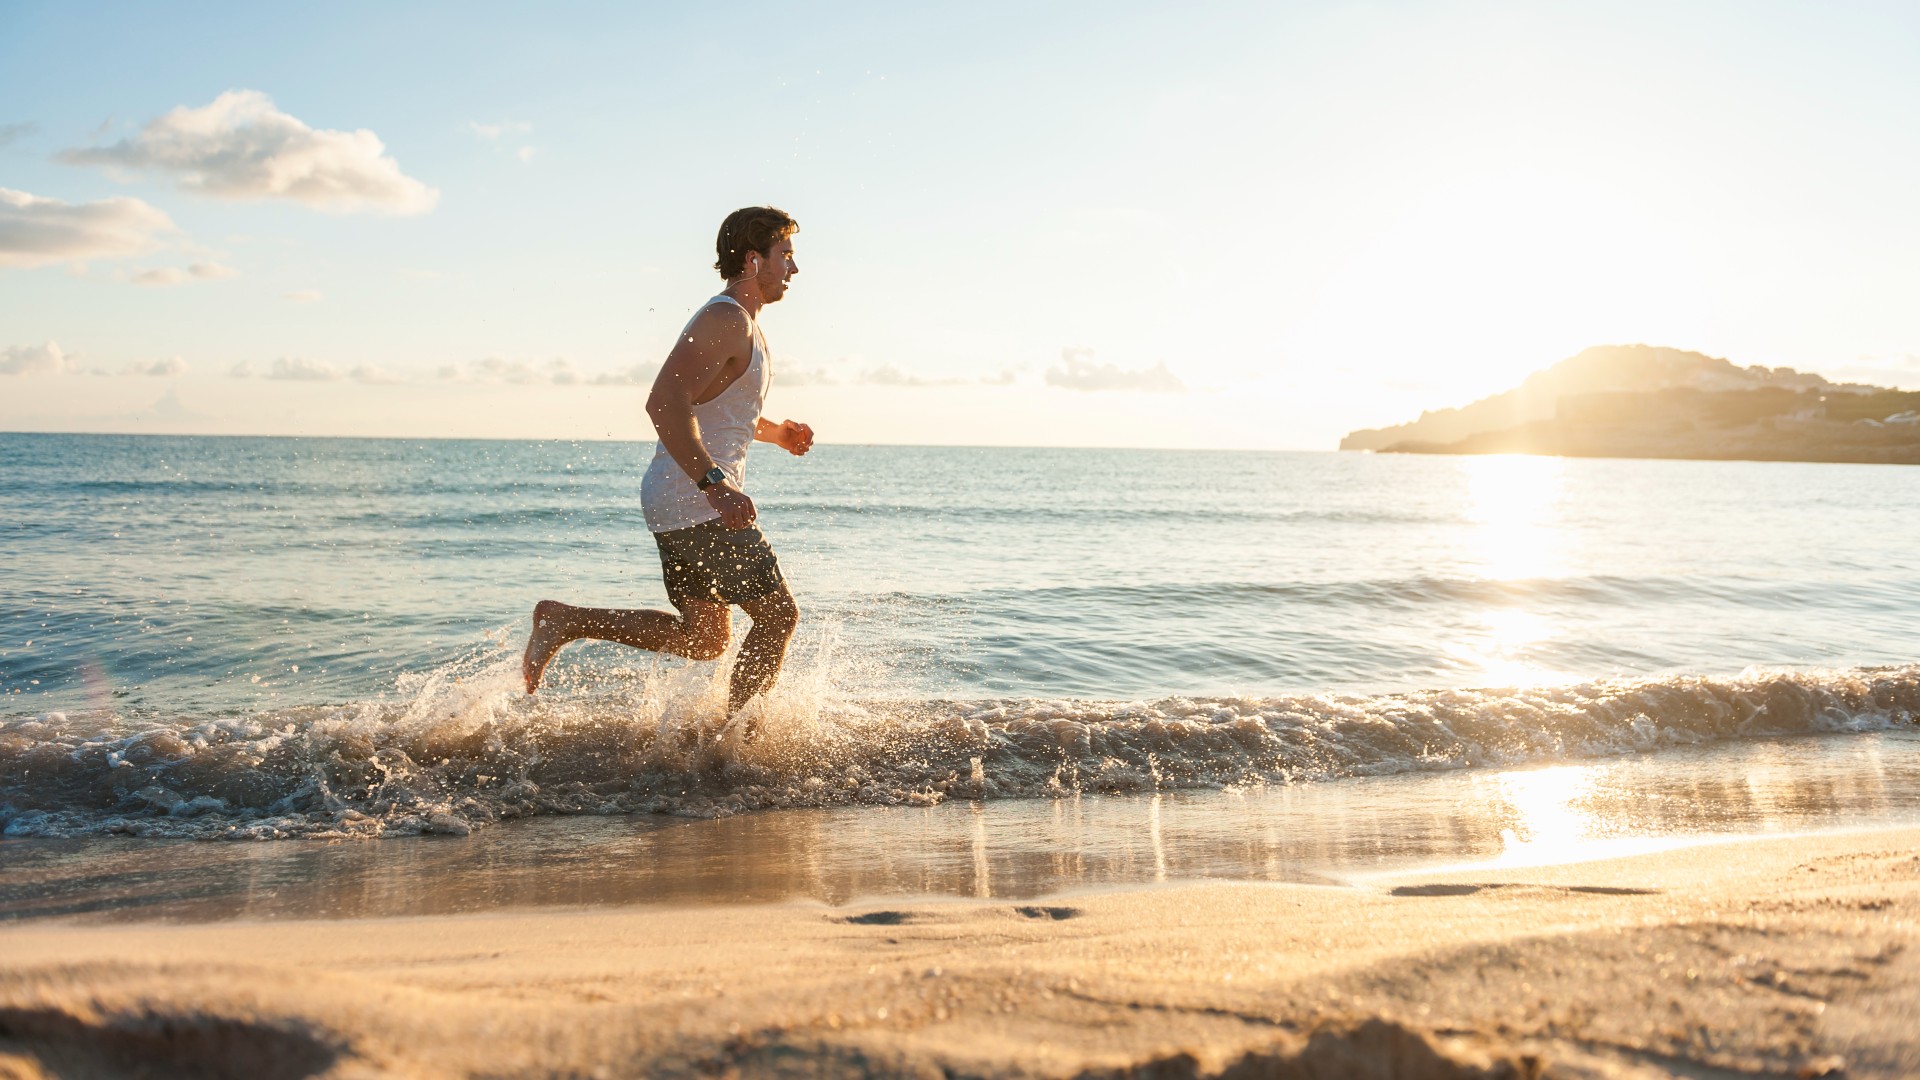 The man running in the water on the beach